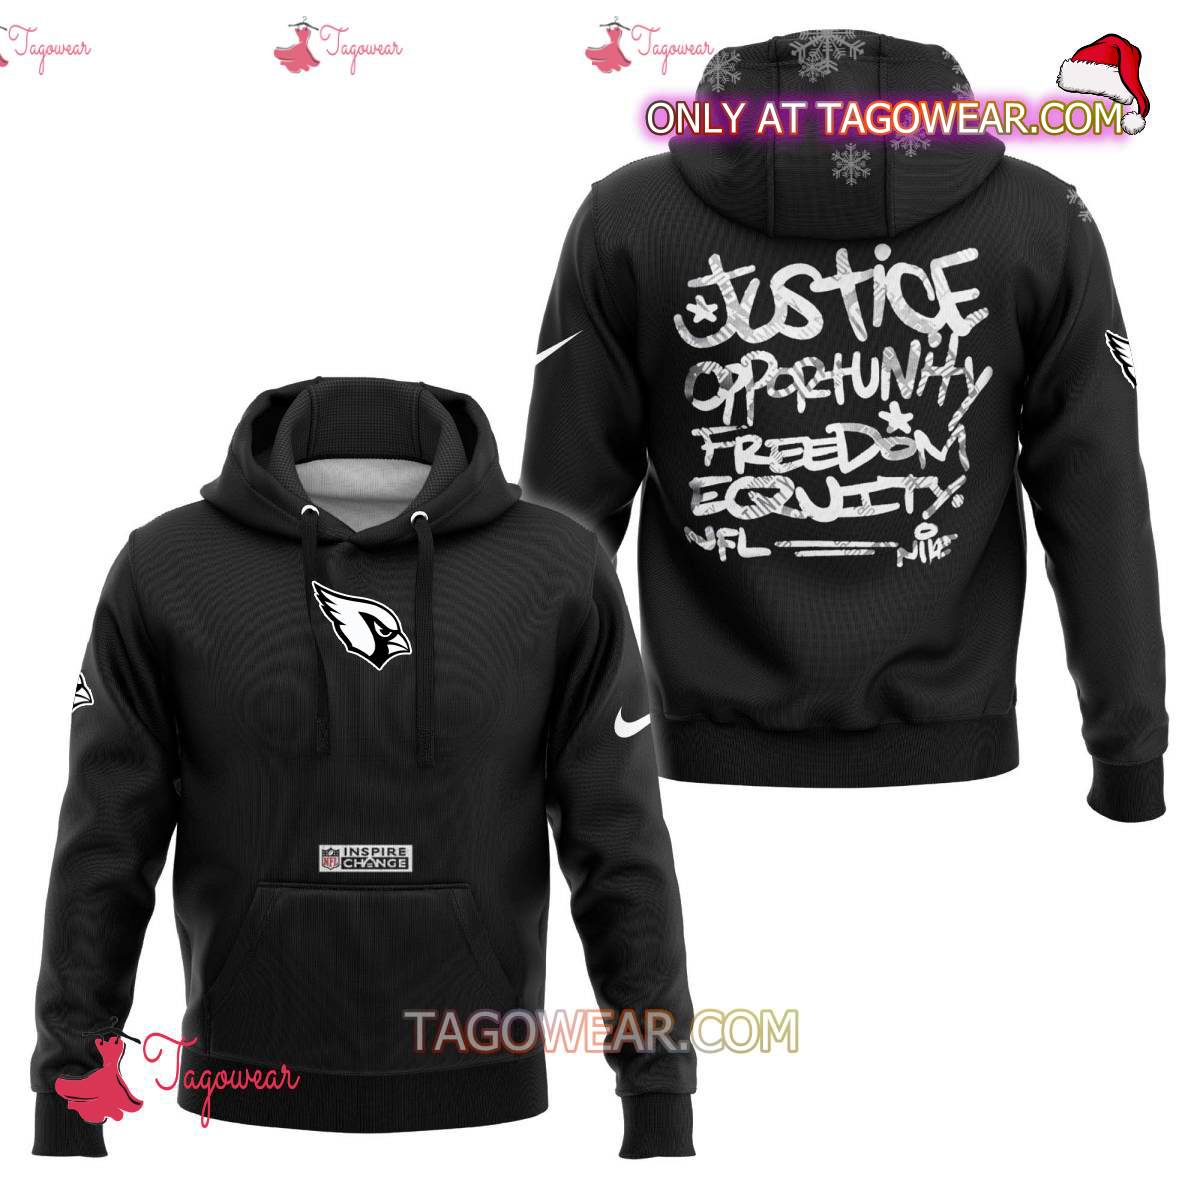 Arizona Cardinals NFL Inspire Change Justice Opportunity Equality Freedom Hoodie